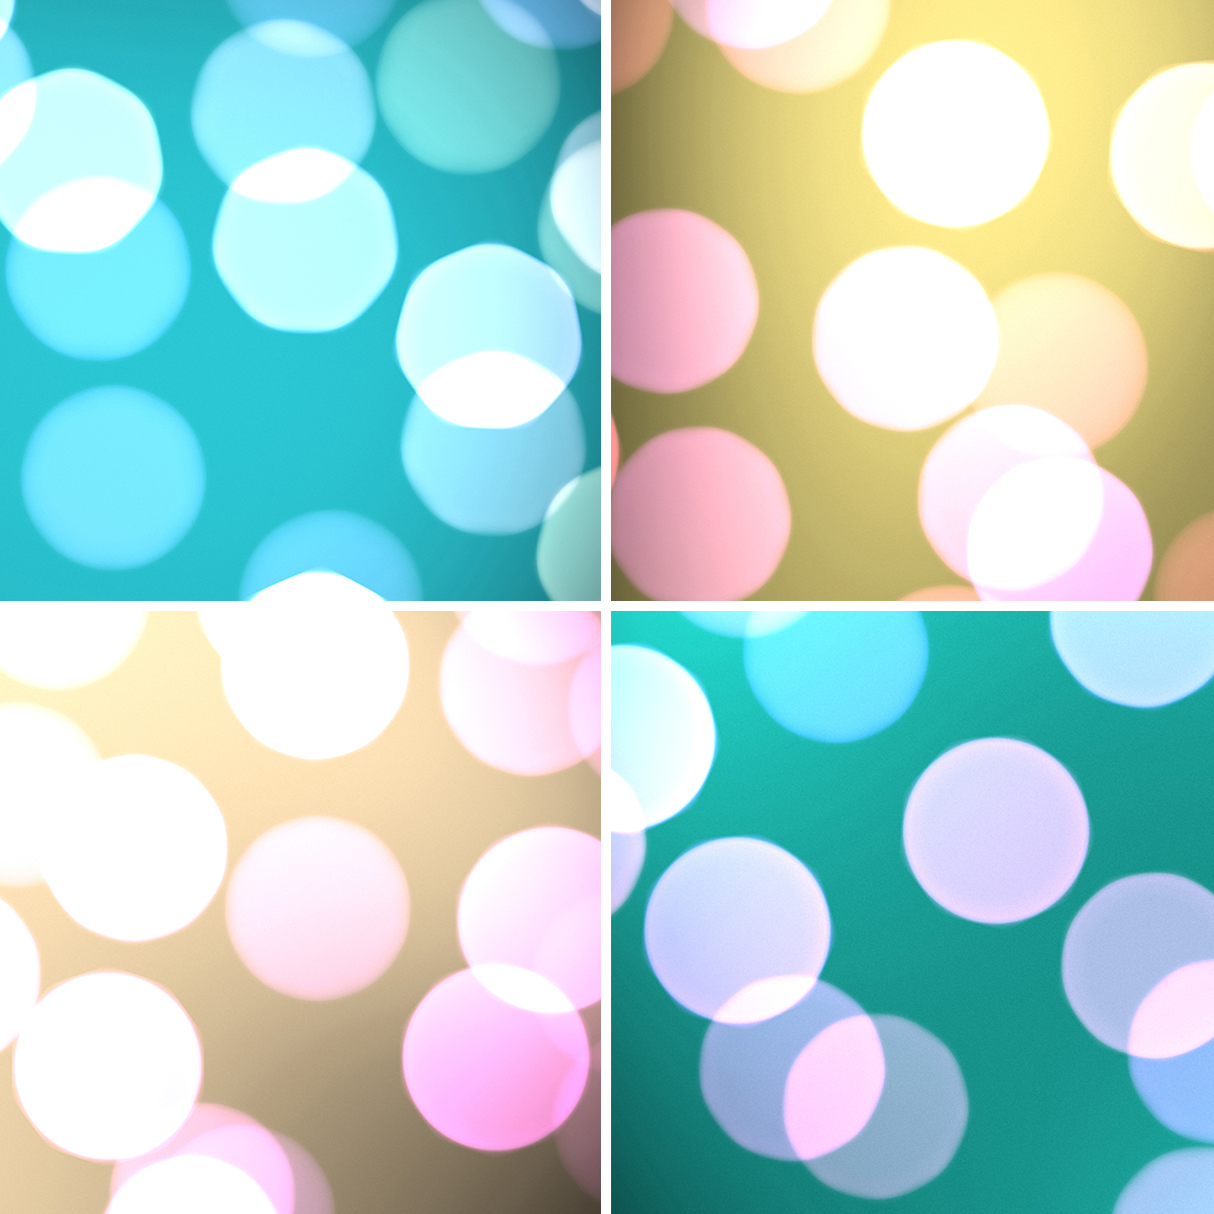 50 Bokeh Pro Backgrounds Samples Preview – Part 11